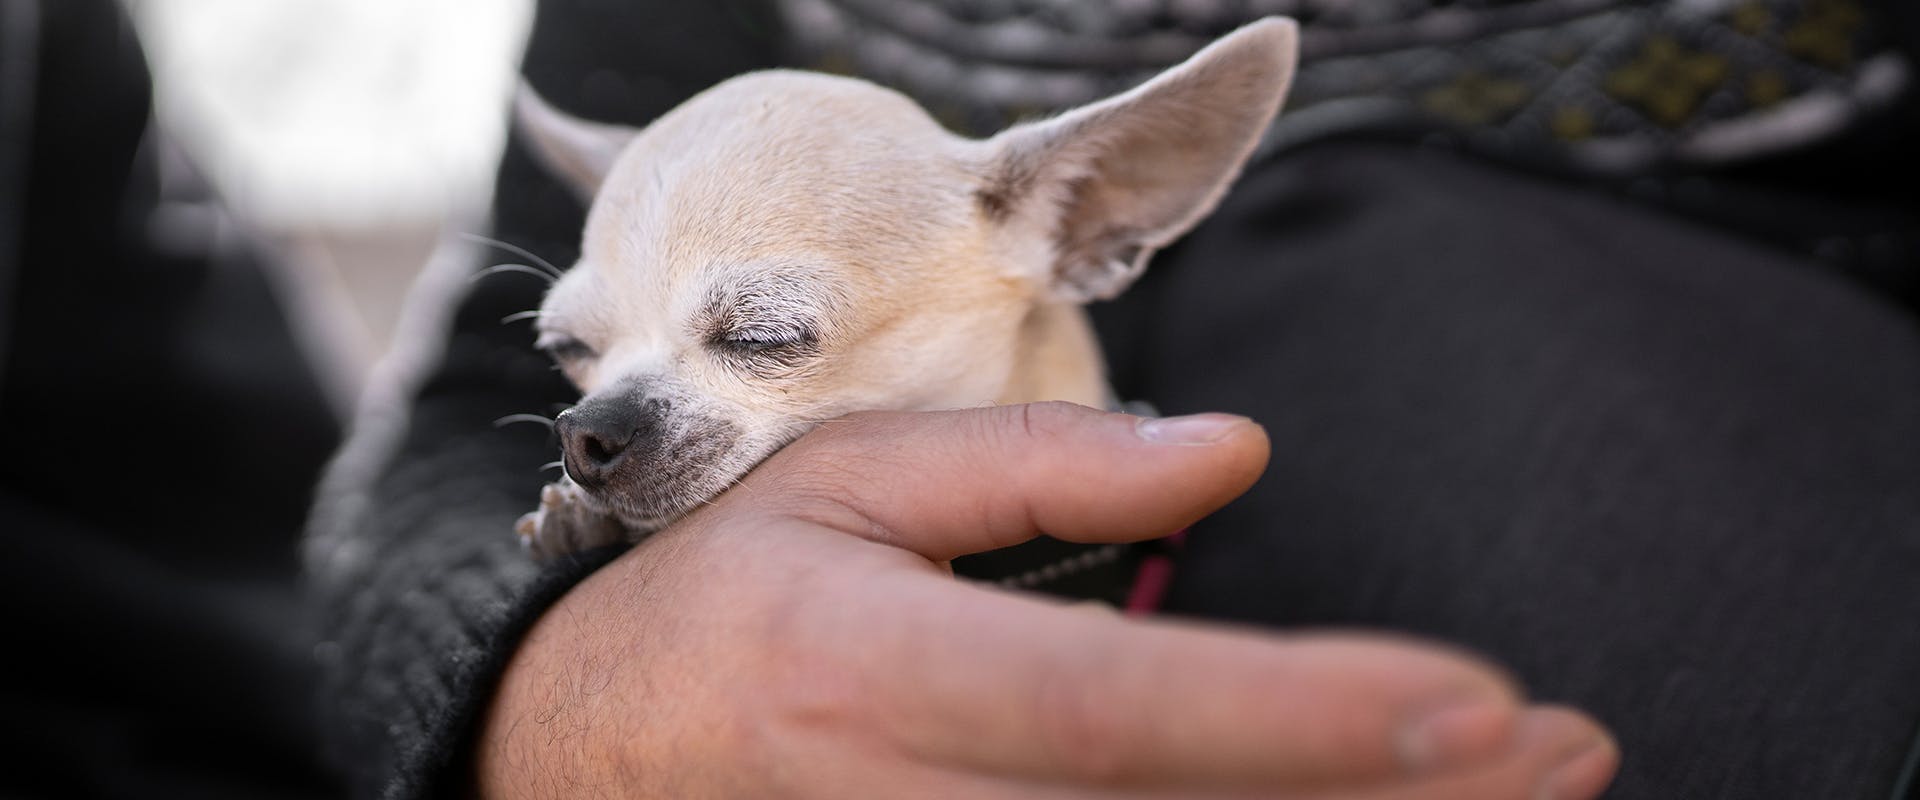 A small Chihuahua lap dog sleeping in the crook of a person's arm 